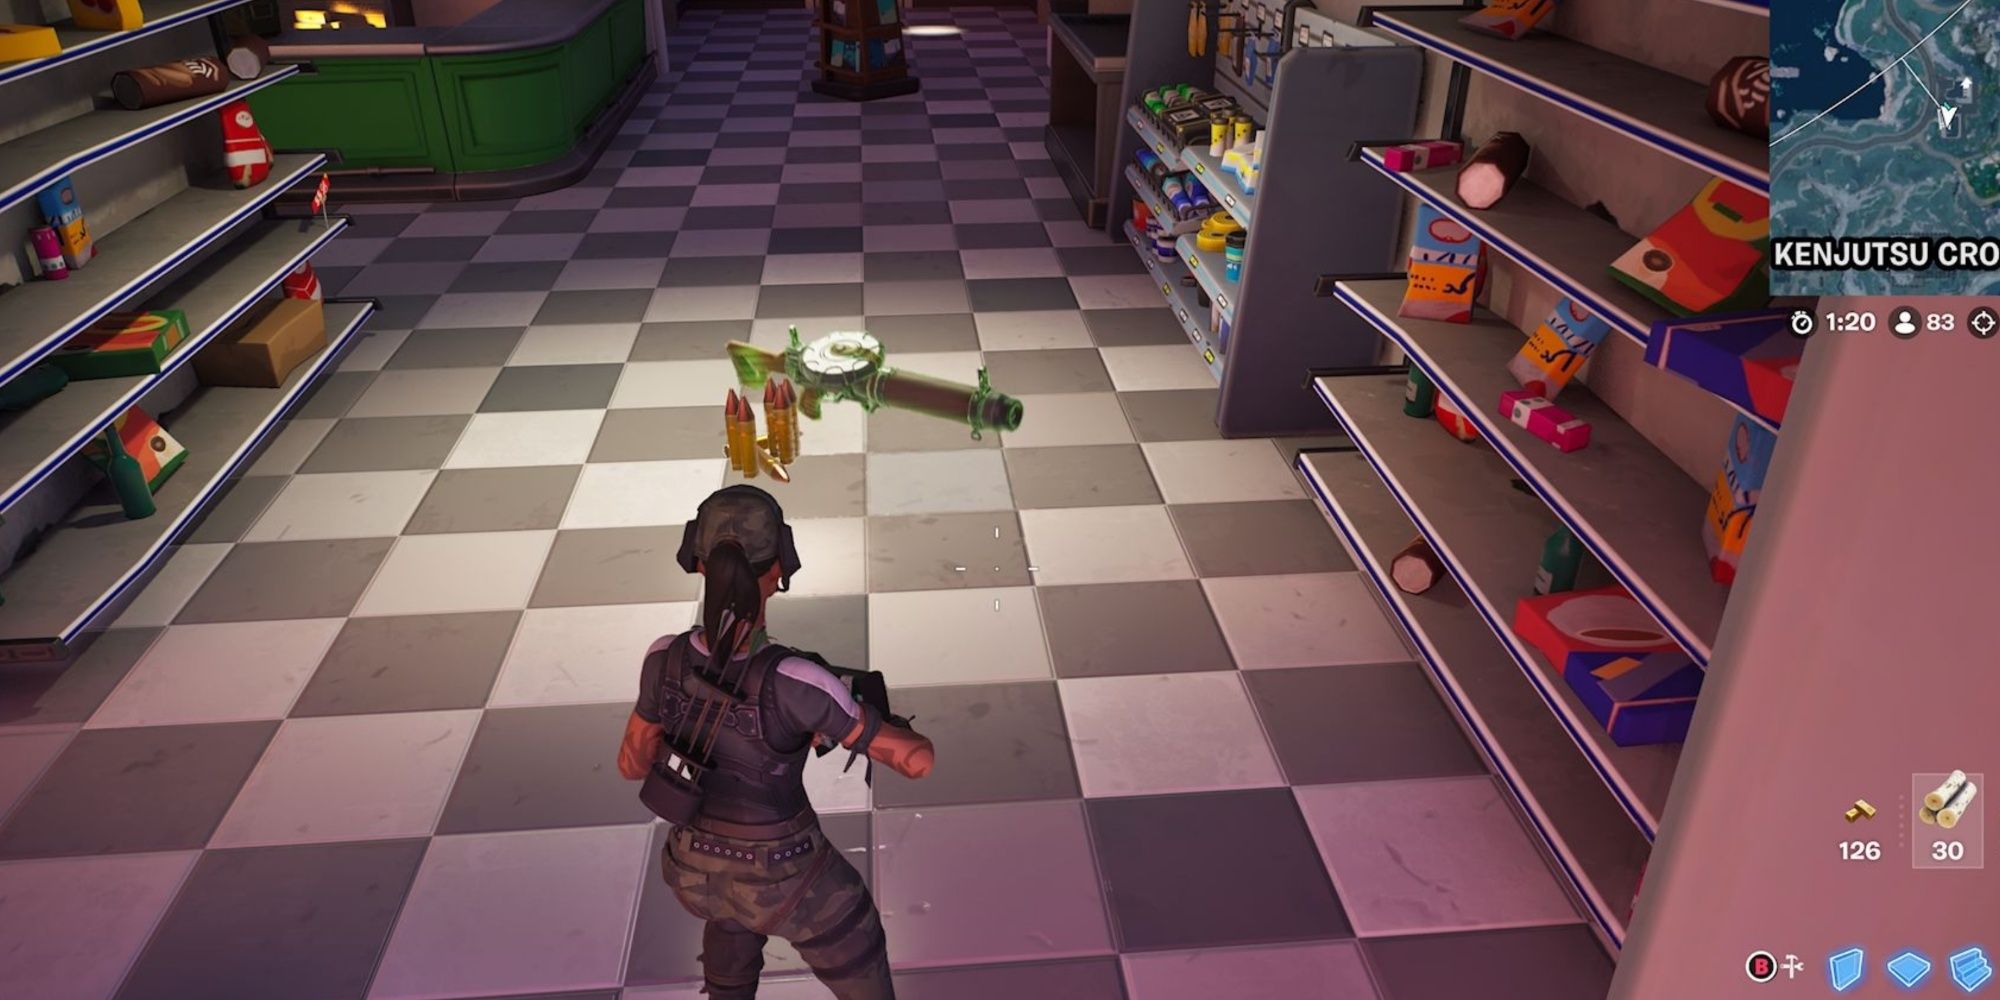 finding the flapjack rifle as floor loot at gas station